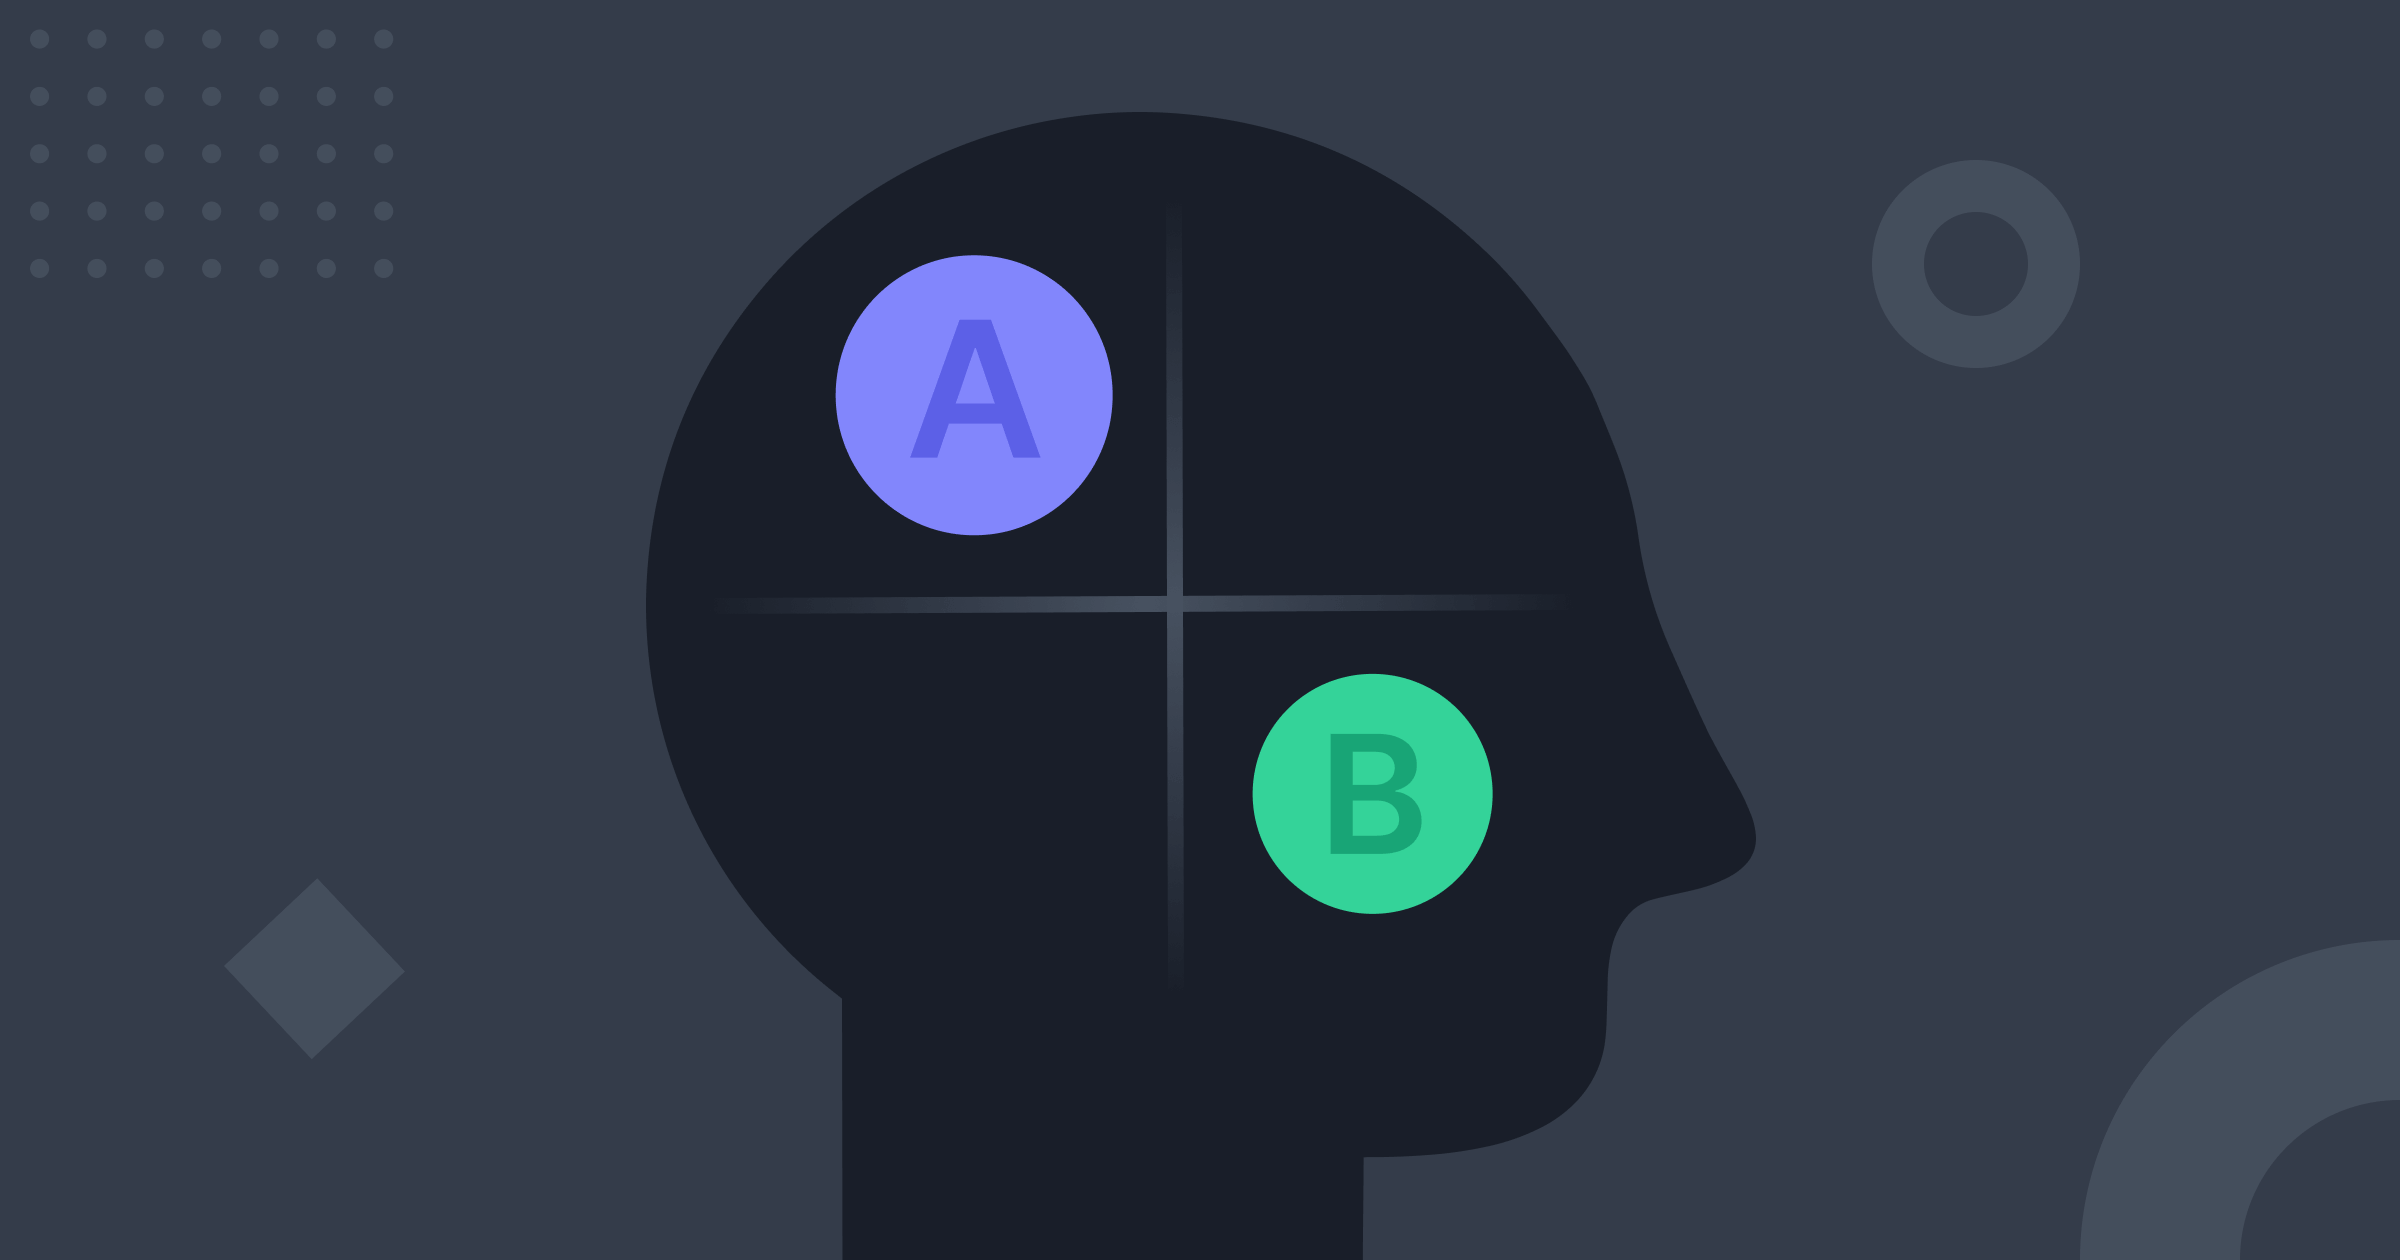 On one side of a person's head avatar there is the letter A and, on the other side, the letter B, representing an AB test.